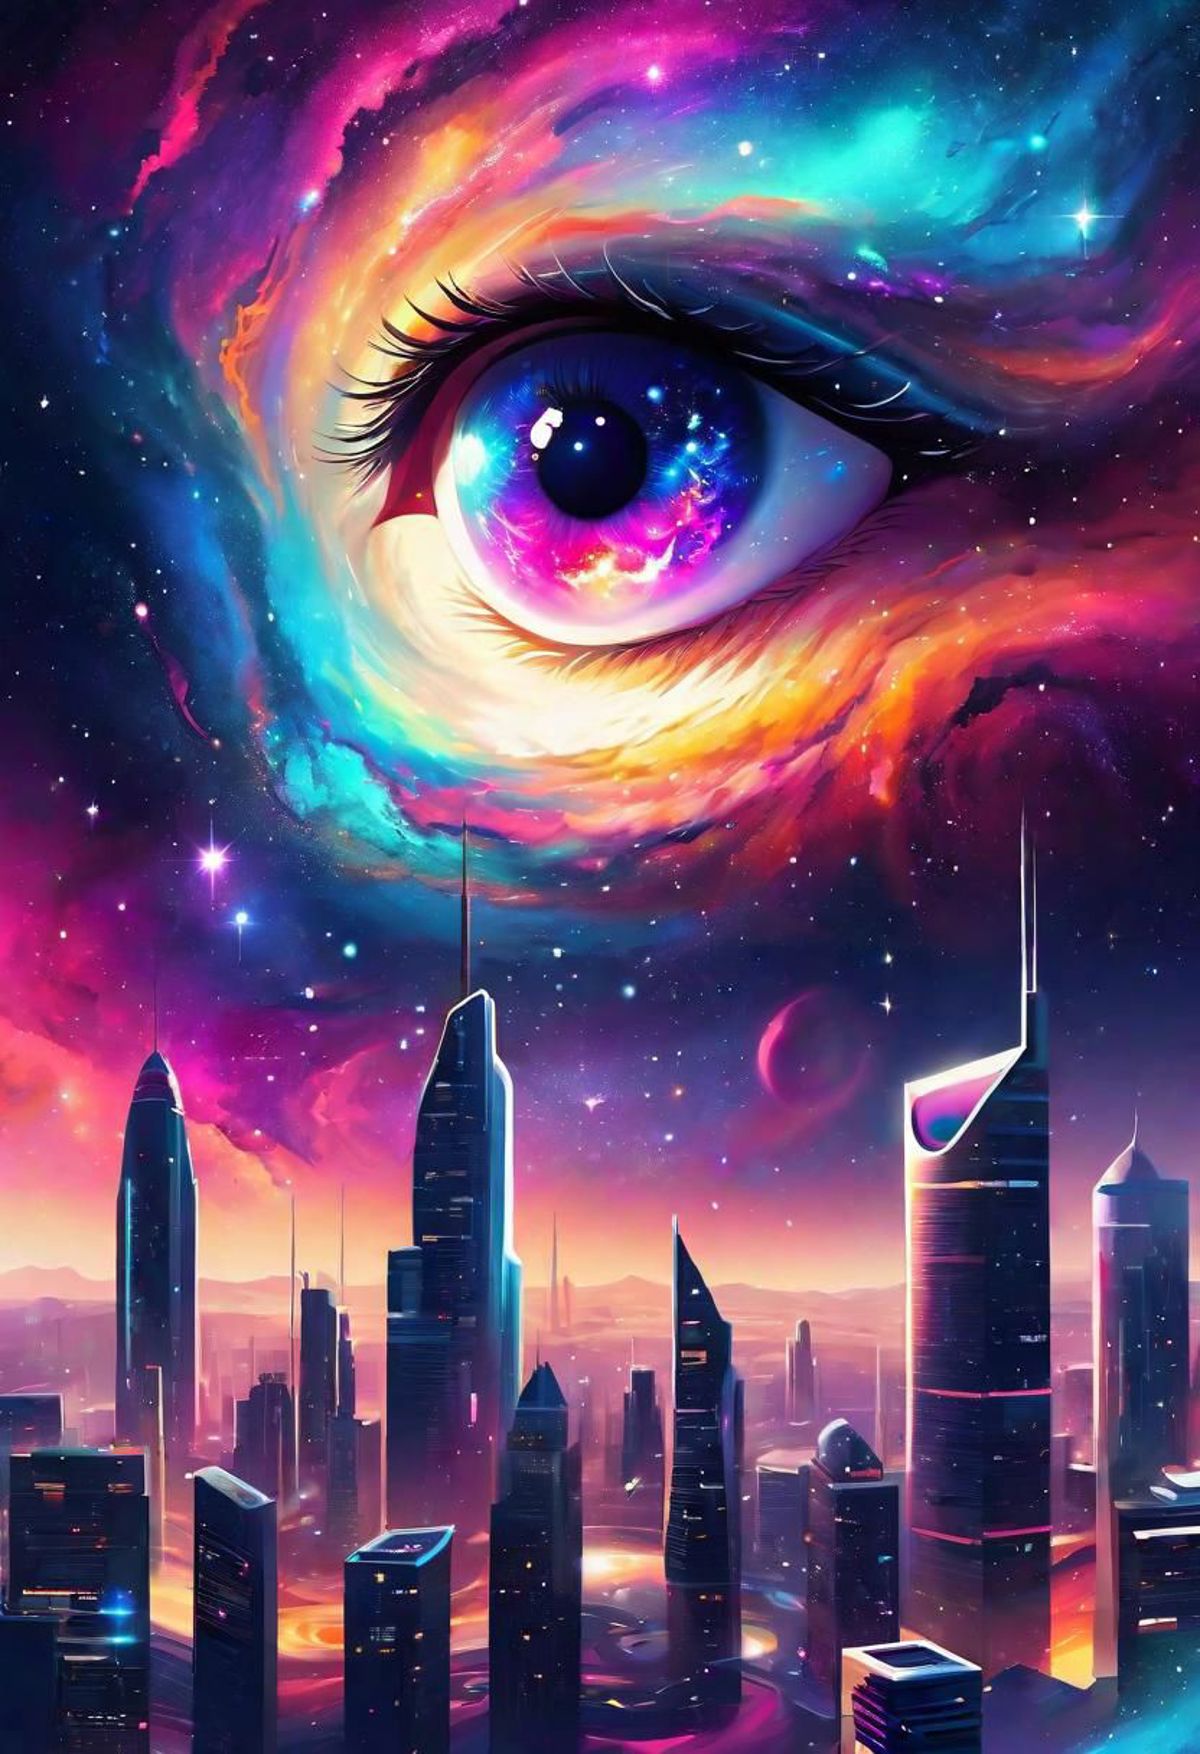 A colorful cityscape with a large eye in the center, surrounded by skyscrapers and a purple sky.